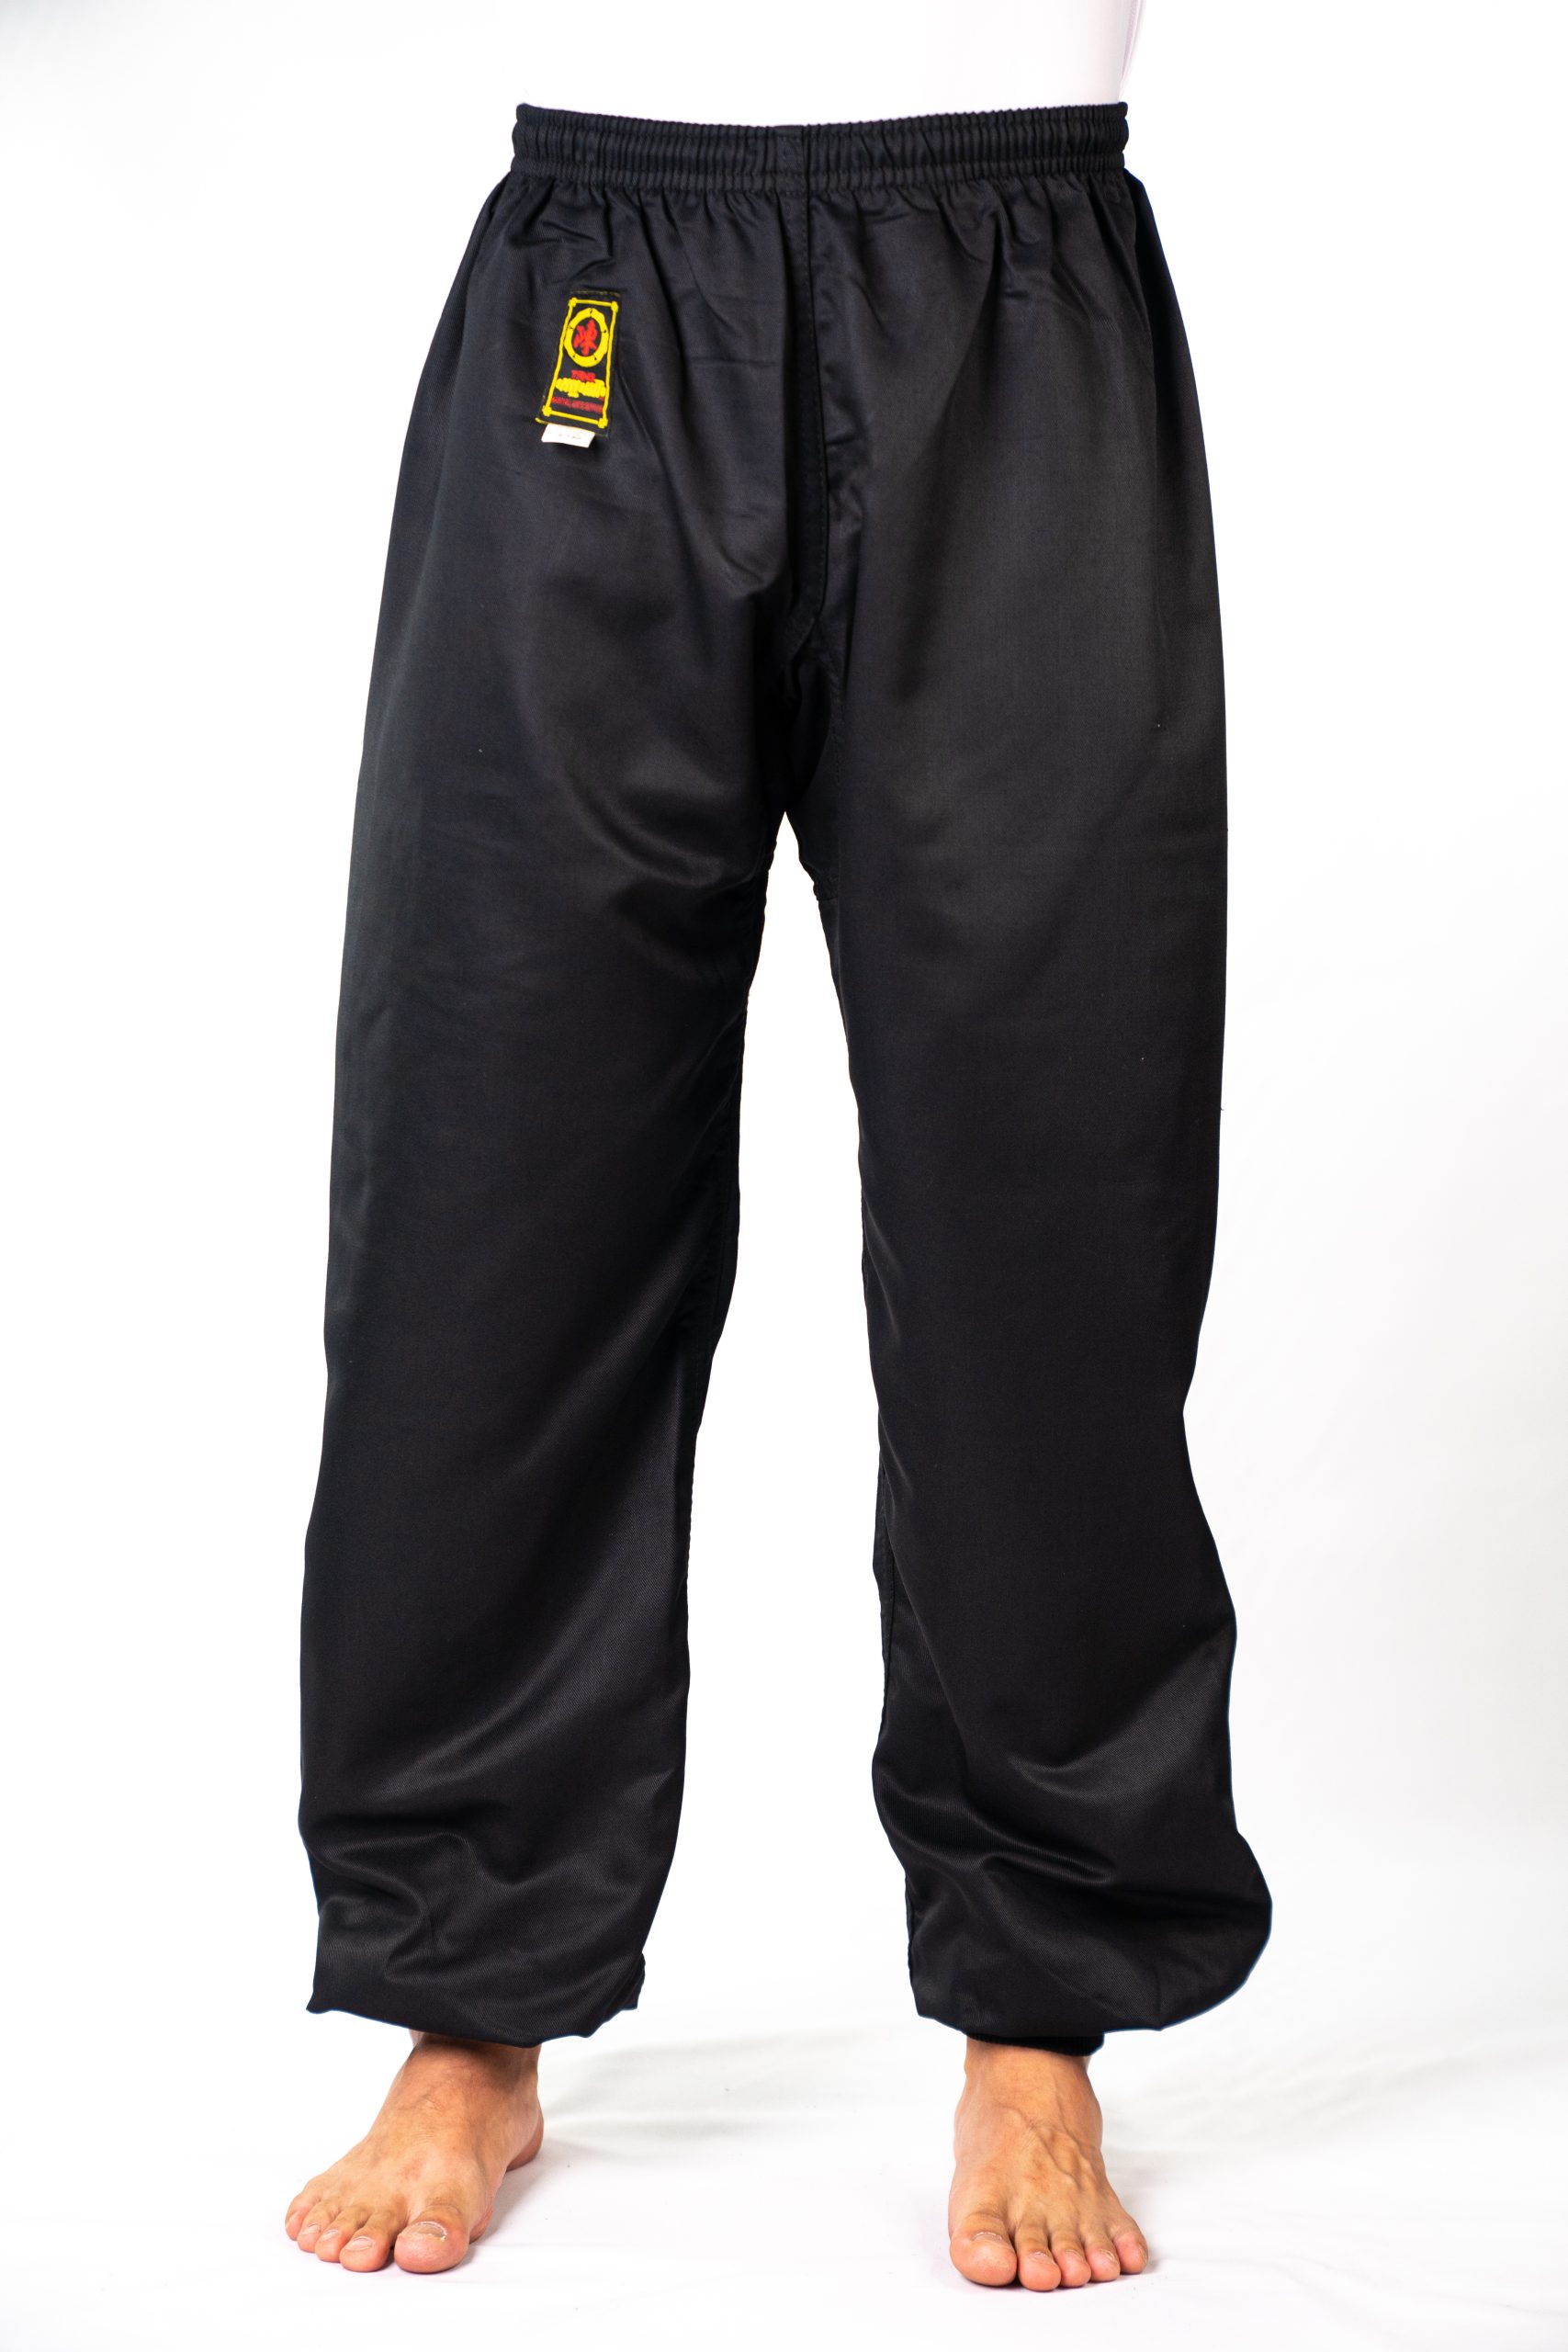 Black Cotton Casual Kung fu Tai chi Pants Martial arts Suit Wing Chun  Trousers,Other traditional Chinese clothes